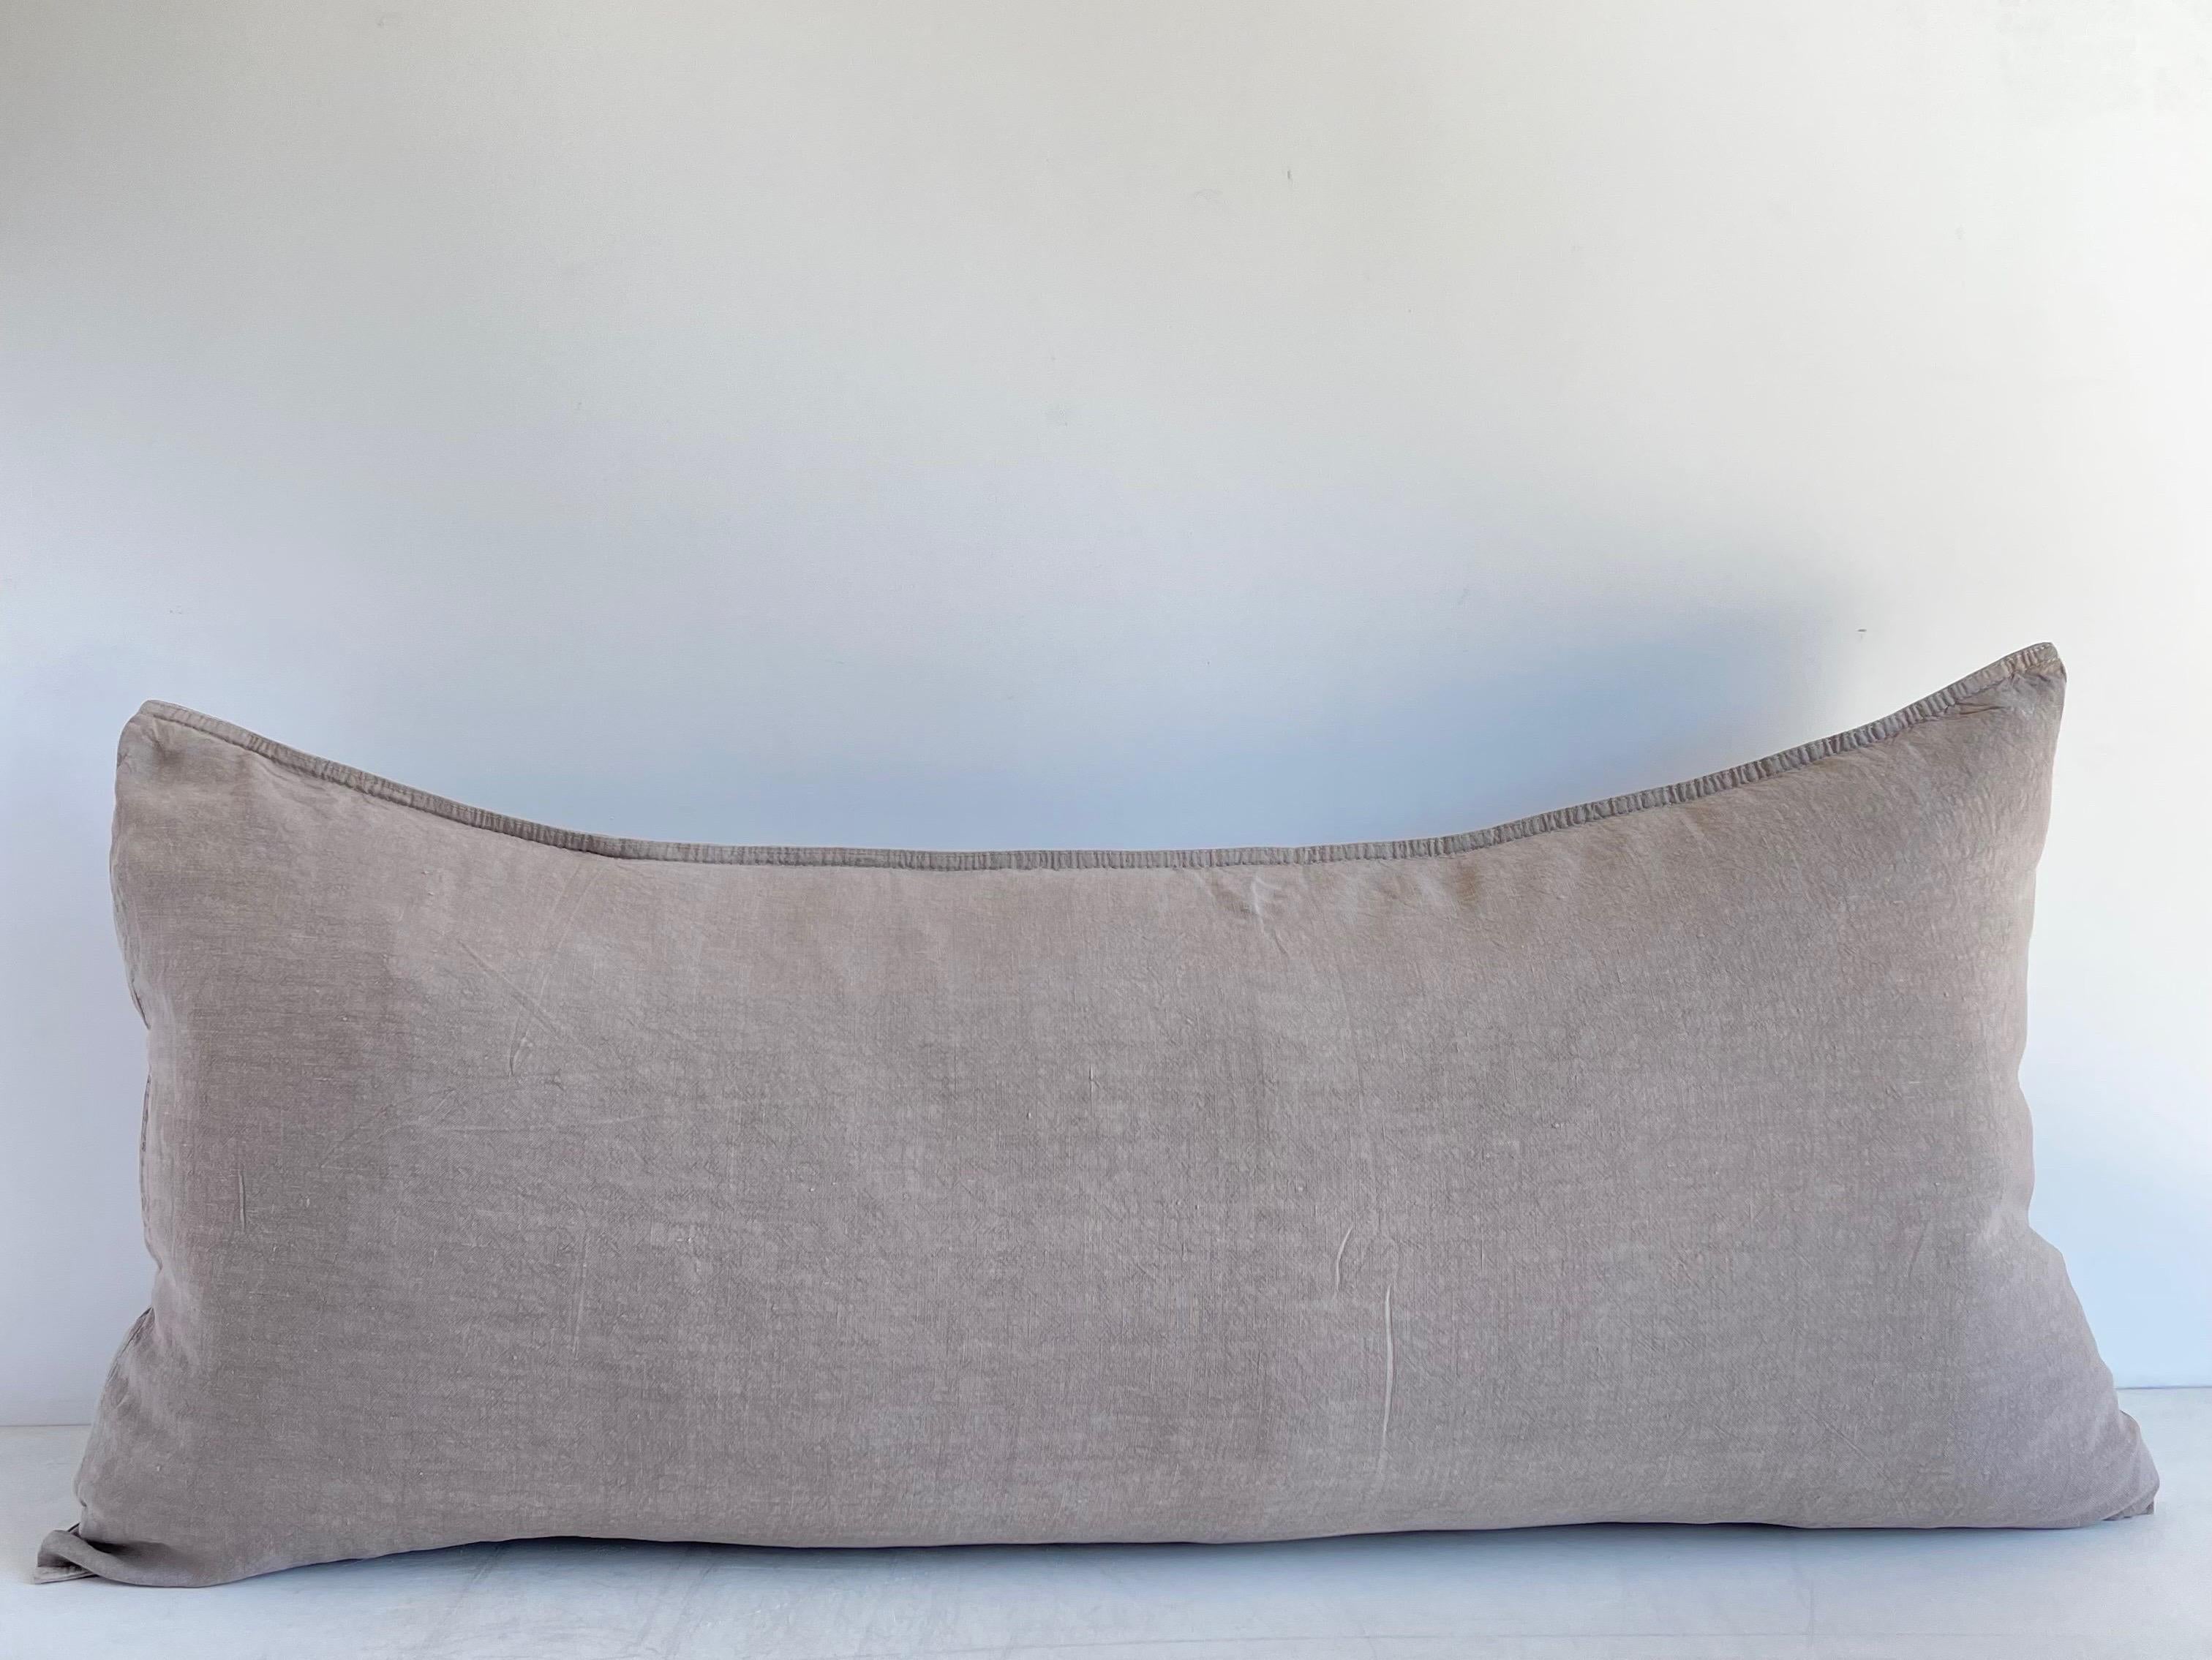 Decorative Accent Pillow in a fine woven smooth soft linen.
Size: 16” x 32” when stuffed with insert. 
Can be used with a king size down insert.
Color: Natural with a slight Plum / Rose Hue.
Decorative Metal buttons at side.
This does not come